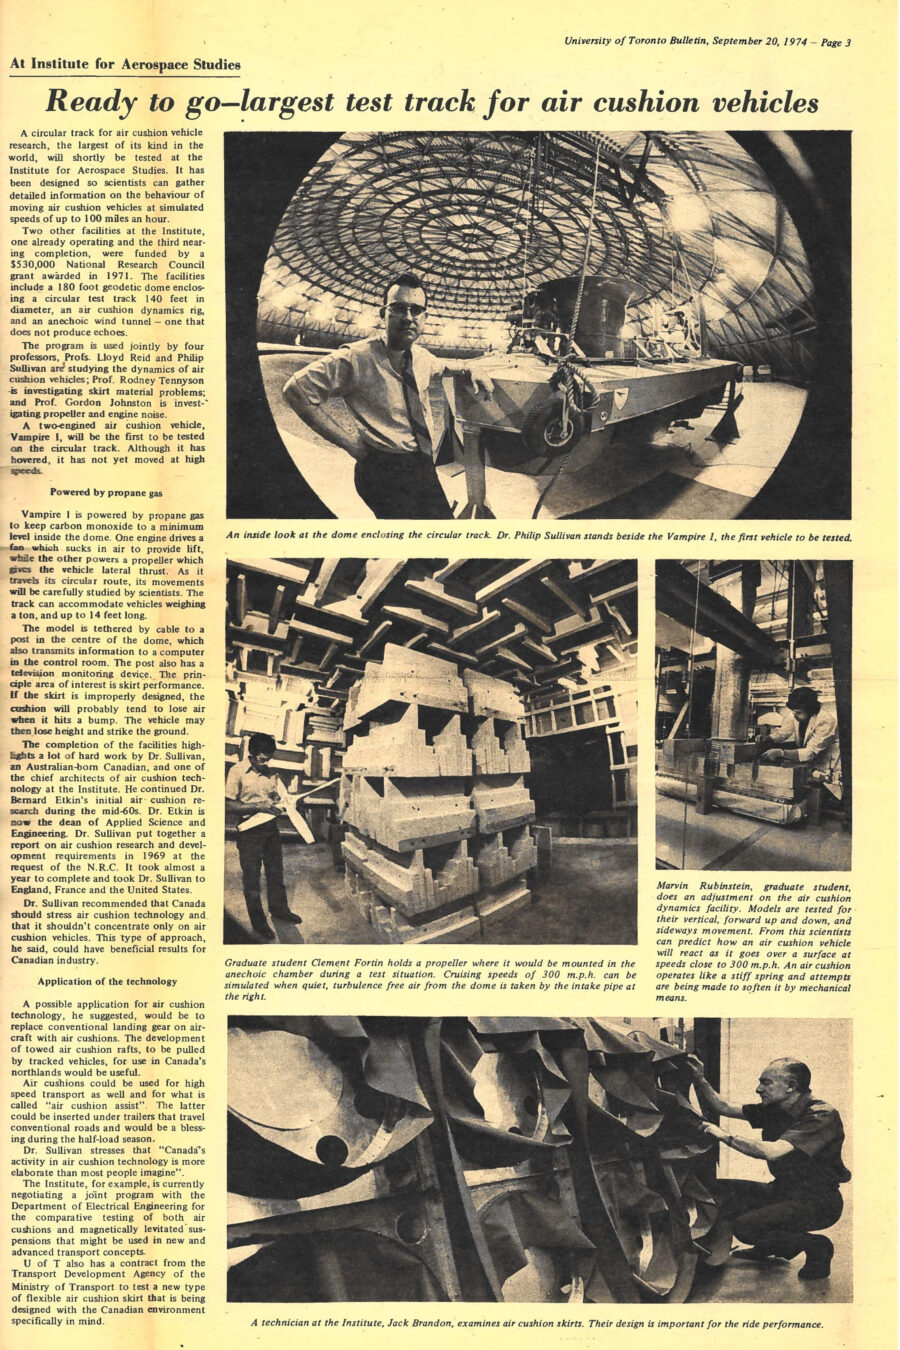 Newspaper clipping from University of Toronto Bulletin, September 20, 1974
Headline: Ready to go – largest test track for air cushion vehicles
Photo 1: A man in short sleeves and dress pants holds a two-foot-long propeller, standing beside the unusual angular foam shapes of an anechoic chamber. 
Caption: Graduate student Clement Fortin holds a propeller where it would be mounted in the anechoic chamber during a test situation. Cruising speeds of 300 miles per hour can be simulated when quiet, turbulence free air from the dome is taken by the intake pipe at right.
Photo 2: A man in a lab coat adjusts a large piece of equipment.
Caption: Marvin Rubinstein, graduate student, does an adjustment on the air cushion dynamics facility. Models are tested for their vertical, forward up and down, and sideways movement. From this scientists can predict how an air cushion vehicle will react as it goes over a surface at speeds close to three hundred miles per hour. An air cushion operates like a stiff spring and attempts are being made to soften it by mechanical means.
Photo 3: A man in work clothes kneels as he examines the large side of an air cushion.
Caption: A technician at the Institute, Jack Brandon, examines air cushion skirts. Their design is important for the ride performance.
A circular track for air cushion vehicle research, the largest of its kind in the world, will shortly be tested at the Institute for Aerospace Studies. It has been designed so scientists can gather detailed information on the behaviour of moving air cushion vehicles at simulated speeds of up to one hundred miles an hour.
Two other facilities at the Institute, one already operating and the third near completion, were funded by a $530,000 National Research Council grant awarded in 1971. The facilities include a one-hundred-and-eighty-foot geodetic dome enclosing a circular test track one-hundred-and-forty-feet in diameter, an air cushion dynamics rig, and an anechoic wind tunnel – one that does not produce echoes.
The program is used jointly by four professors, Professors Lloyd Reid and Philip Sullivan are studying the dynamics of air cushion vehicle; Professor Rodney Tennyson is investigating skirt material problems; and Professor Gordon Johnston is investigating propeller and engine noise.
A two-engined air cushion vehicle, Vampire I, will be the first to be tested on the circular track. Although it has hovered, it has not yet moved at high speeds. Vampire I is powered by propane gas to keep carbon monoxide to a minimum level inside the dome. One engine drives a fan which sucks in air to provide lift, while the other powers a propeller which gives the vehicle lateral thrust. As it travels its circular route, its movements will be carefully studied by scientists. The track can accommodate vehicles weighing a ton, and up to fourteen feet long.
The model is tethered by cable to a post in the centre of the dome, which also transmits information to a computer in the control room. The post also has a television monitoring device. The principle area of interest is skirt performance. If the skirt is improperly designed, the cushion will probably tend to lose air when it hits a bump. The vehicle may then lose height and strike the ground.
The completion of the facilities highlights a lot of hard work by Doctor Sullivan, an Australian-born Canadian, and one of the chief architects of air cushion technology at the Institute. He continued Doctor Bernard Etkin’s initial air cushion research during the mid-sixties. Doctor Etkin is now the dean of Applied Science and Engineering. Doctor Sullivan put together a report on air cushion research and development requirements in 1969 at the request of the National Research Council. It took almost a year to complete and took Doctor Sullivan to England, France and the United States.
Doctor Sullivan recommended that Canada should stress air cushion technology and that it should not concentrate only on air cushion vehicles. This type of approach, he said, could have beneficial results for Canadian industry. A possible application for air cushion technology, he suggested, would be to replace conventional landing gear on aircraft with air cushions. The development of towed air cushion rafts, to be pulled by tracked vehicles, for use in Canada’s northlands would be useful.
Air cushions could be used for high speed transport as well and for what is called “air cushion assist.” The latter could be inserted under trailers that travel conventional roads and would be a blessing during the half-load season.
Doctor Sullivan stresses that “Canada’s activity in air cushion technology is more elaborate than most people imagine.” The Institute, for example, is currently negotiating a joint program with the Department of Electrical Engineering for the comparative testing of both air cushions and magnetically levitated suspensions that might be used in new and advanced transport concepts.
University of Toronto also has a contract from the Transport Development Agency of the Ministry of Transport to test a new type of flexible air cushion skirt that is being designed with the Canadian environment specifically in mind.